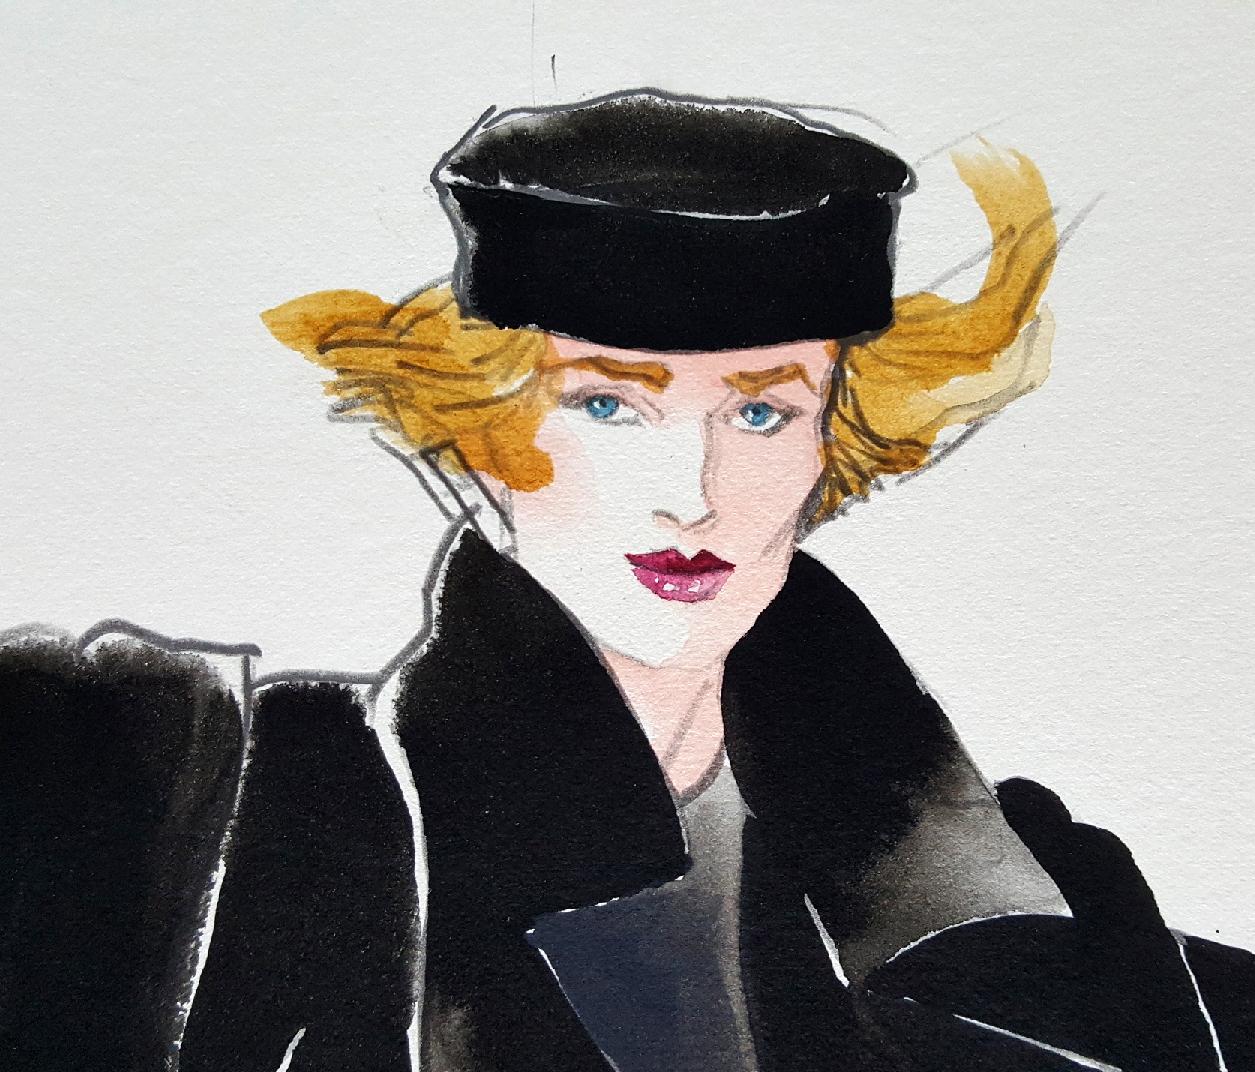 Vogue Magazine Fashion Illustration (Stephen Sprouse)
Antonio's mature style is on full display with a few quick strokes of the brush he is exemplifying the epitome of style and class

Signature: not signed American Vogue, June 1984. Fashion